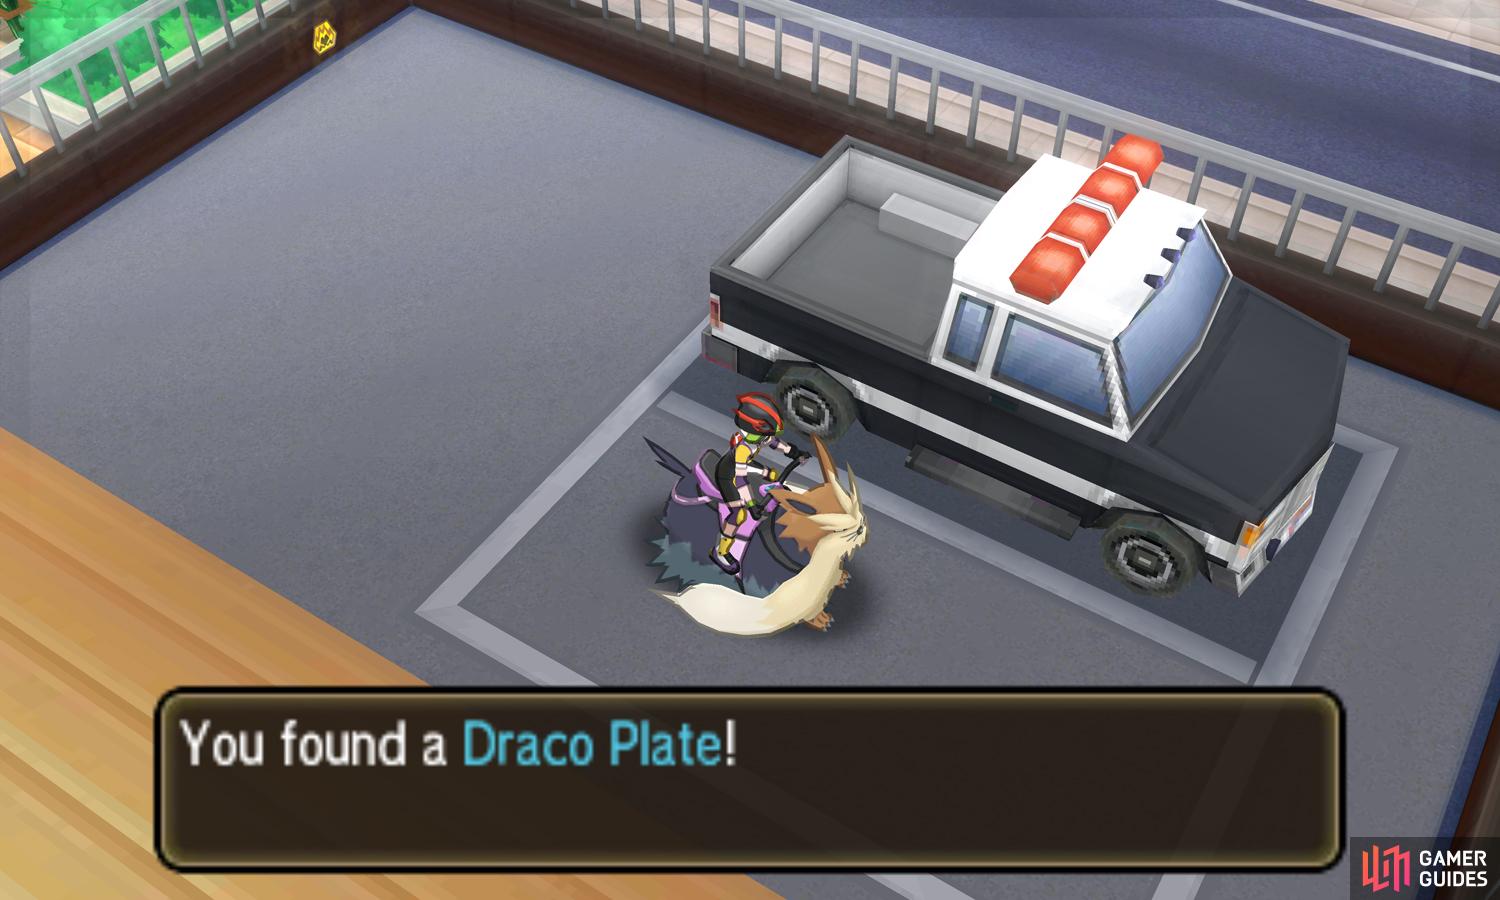 Even if you don't have Arceus, these plates could come in handy.